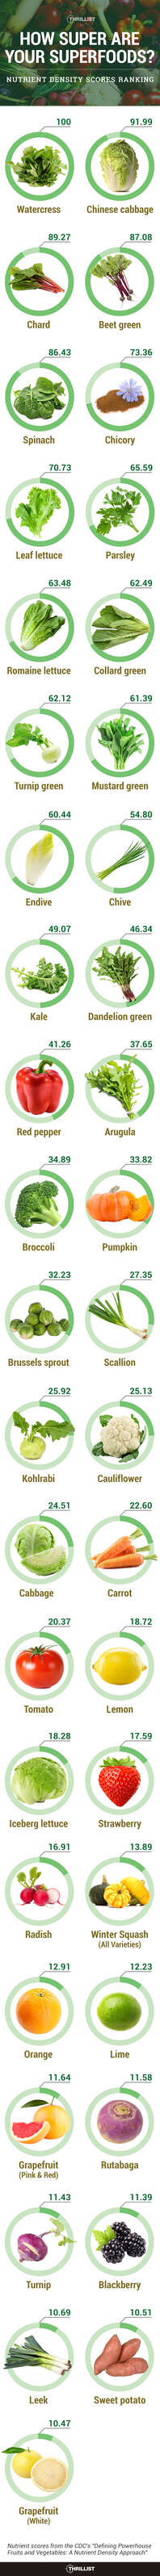 superfood, nutrition, infographic